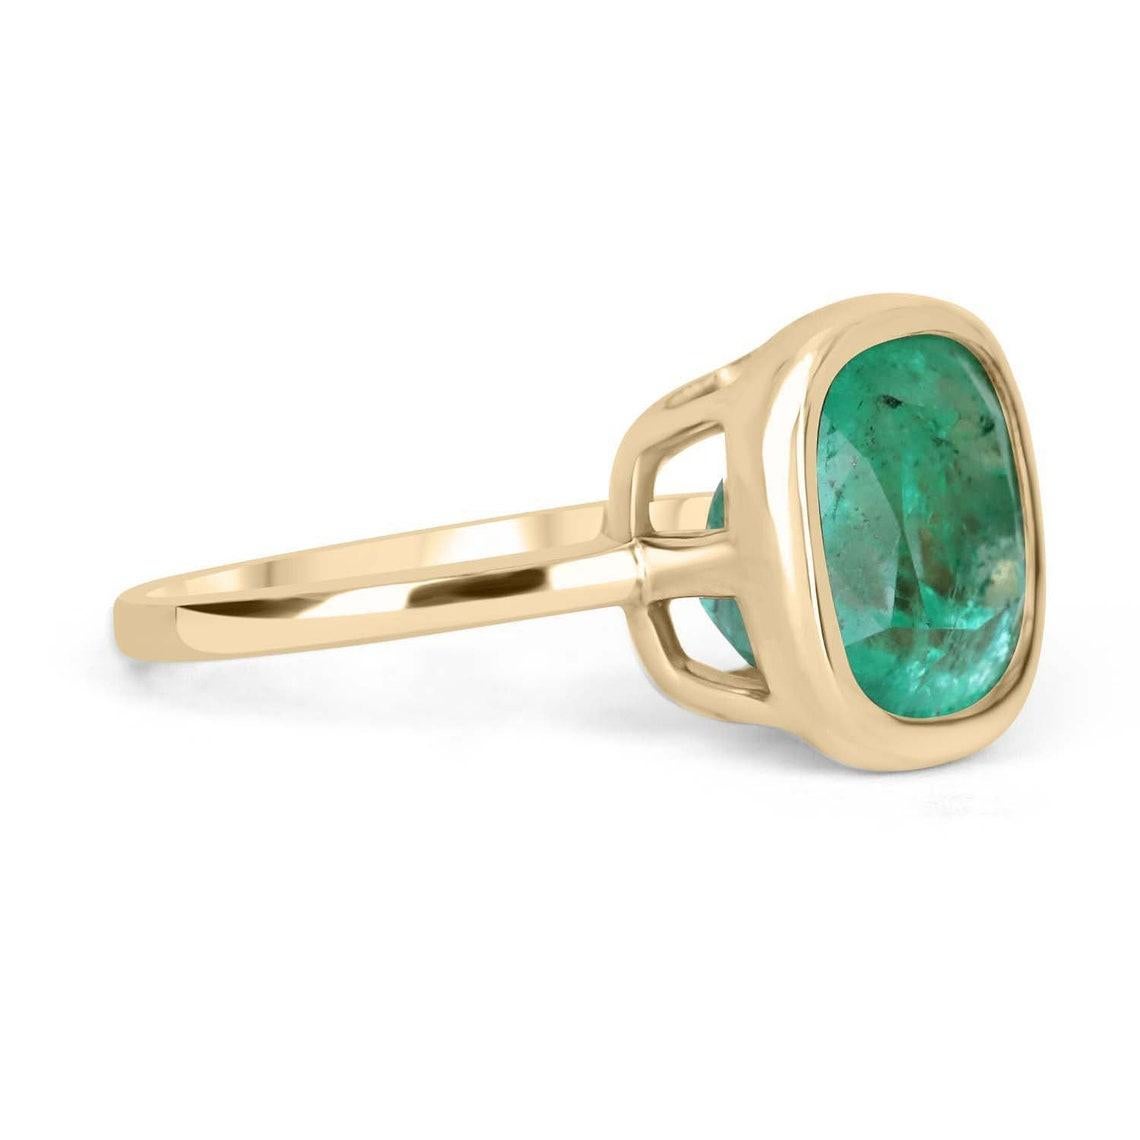 This ring is not for the faint of heart! Displayed is a medium Colombian emerald solitaire cushion-cut engagement/right-hand ring in 14K yellow gold. This gorgeous solitaire ring carries a full 6.12-carat emerald in a golden bezel setting. The